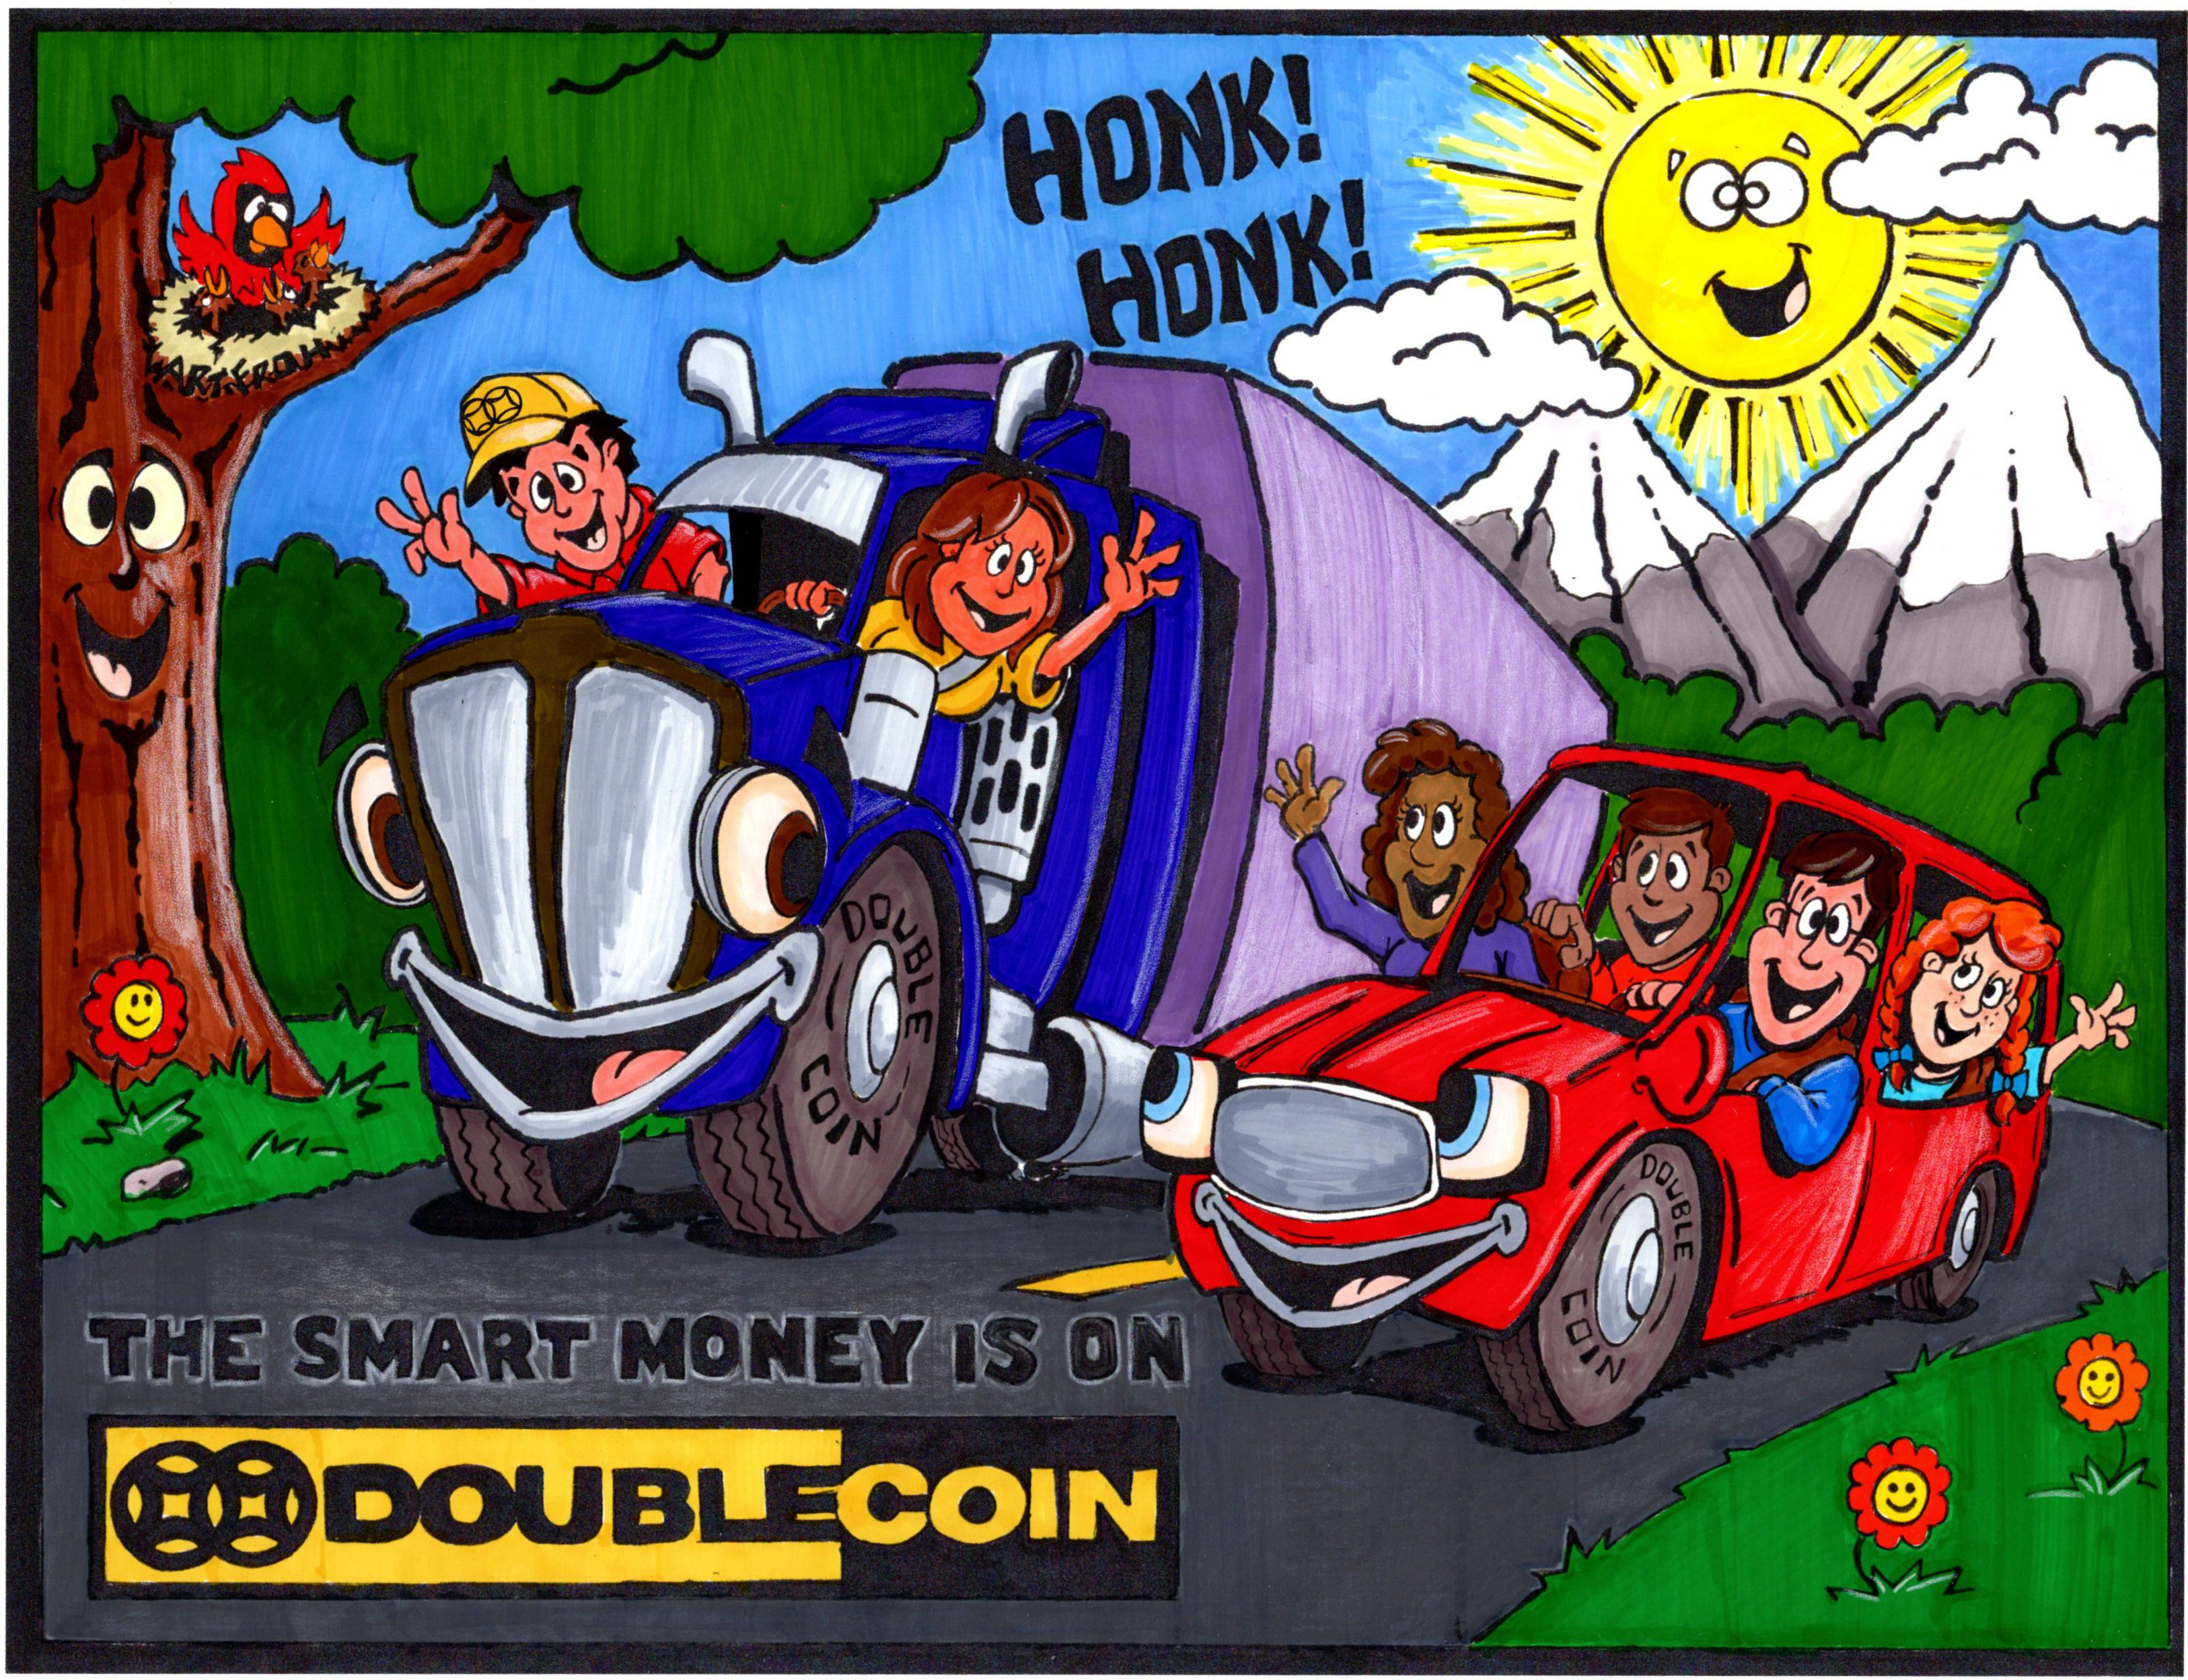 Double Coin Coloring Contest - young kid version-1